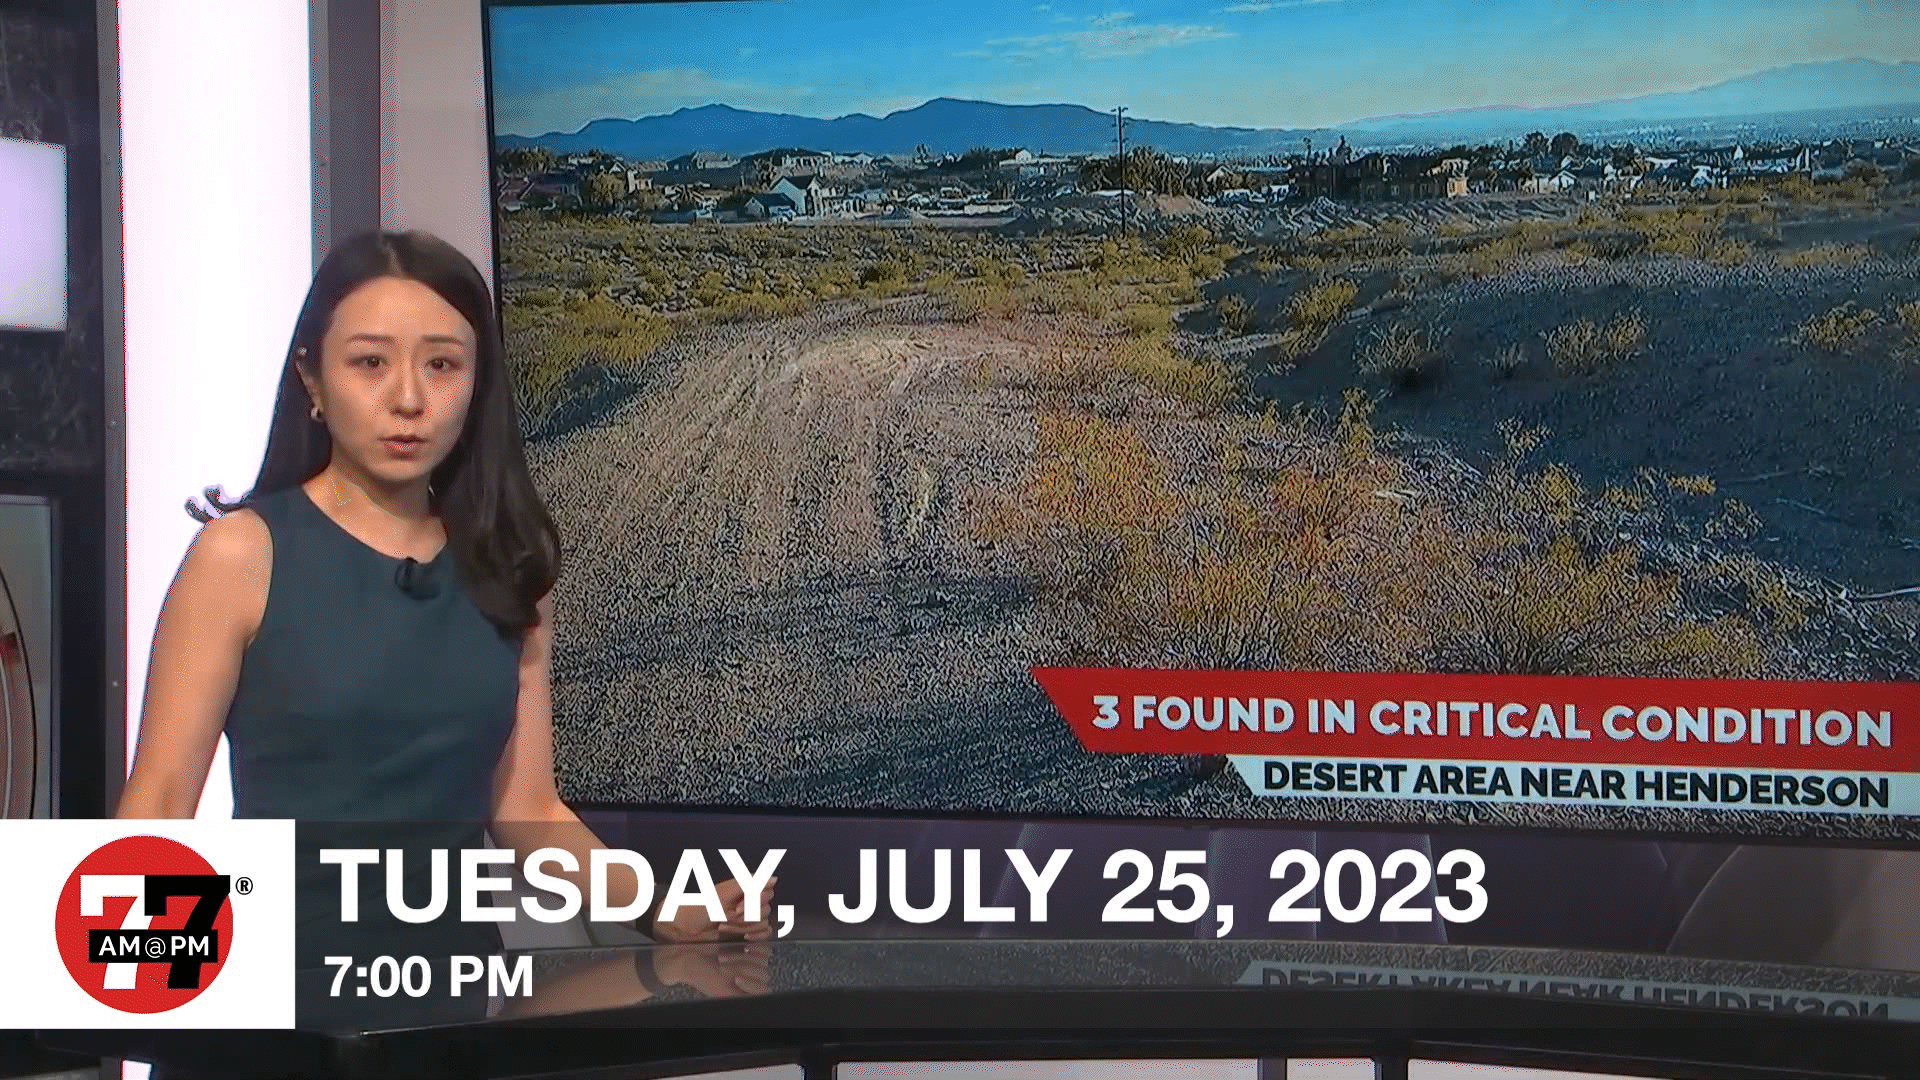 7@7PM for Tuesday, July 25, 2023